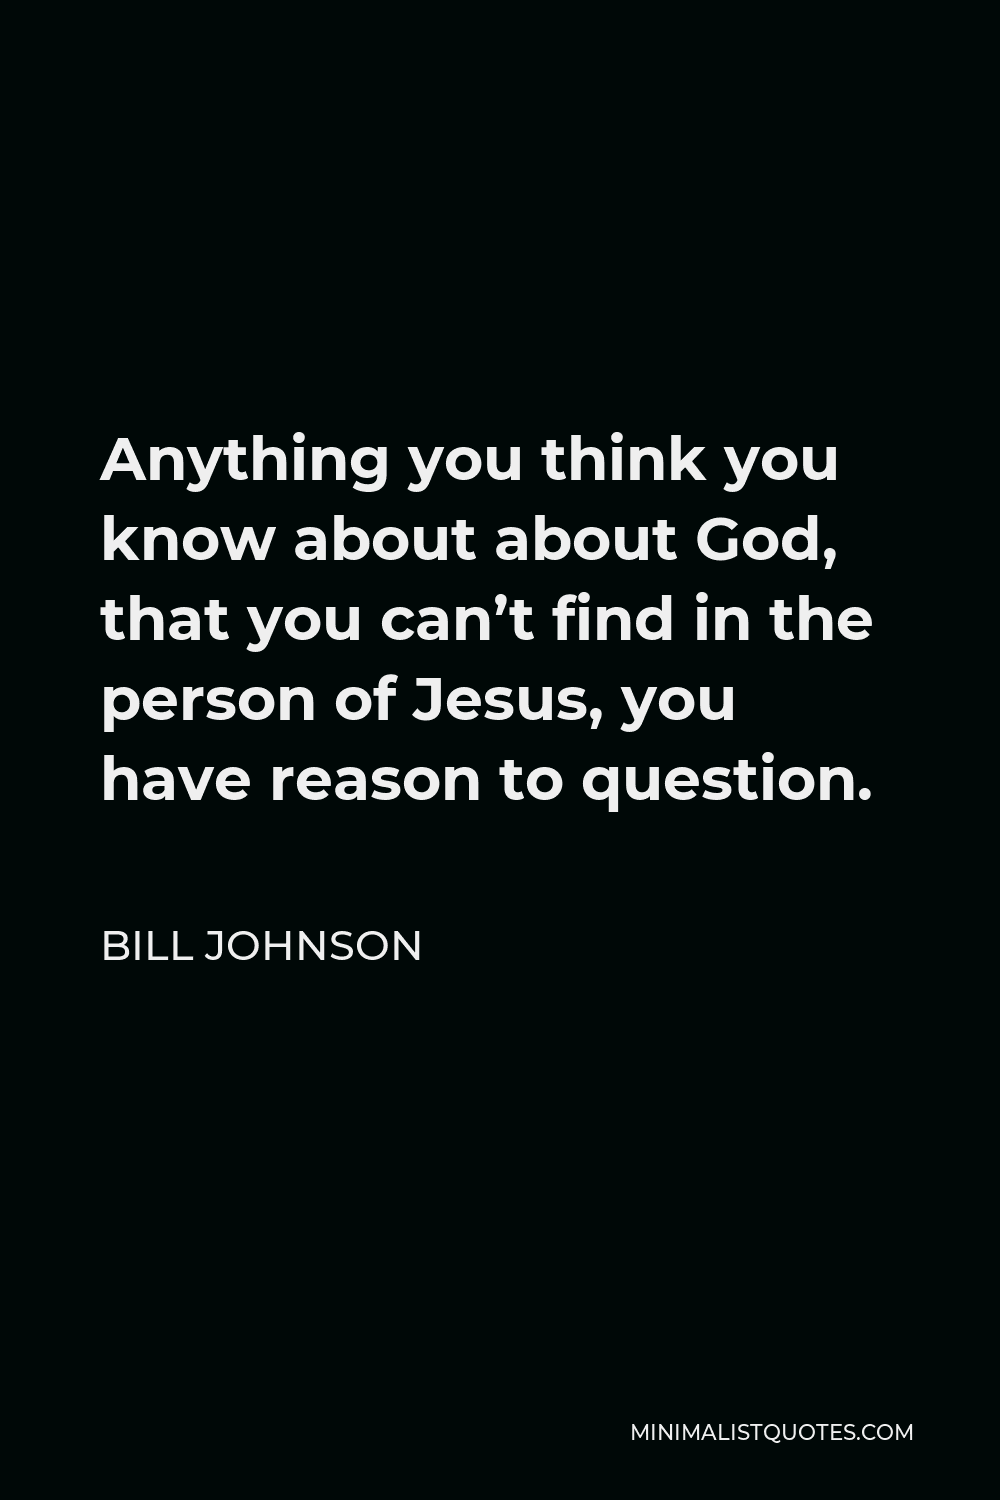 Bill Johnson Quote - Anything you think you know about about God, that you can’t find in the person of Jesus, you have reason to question.